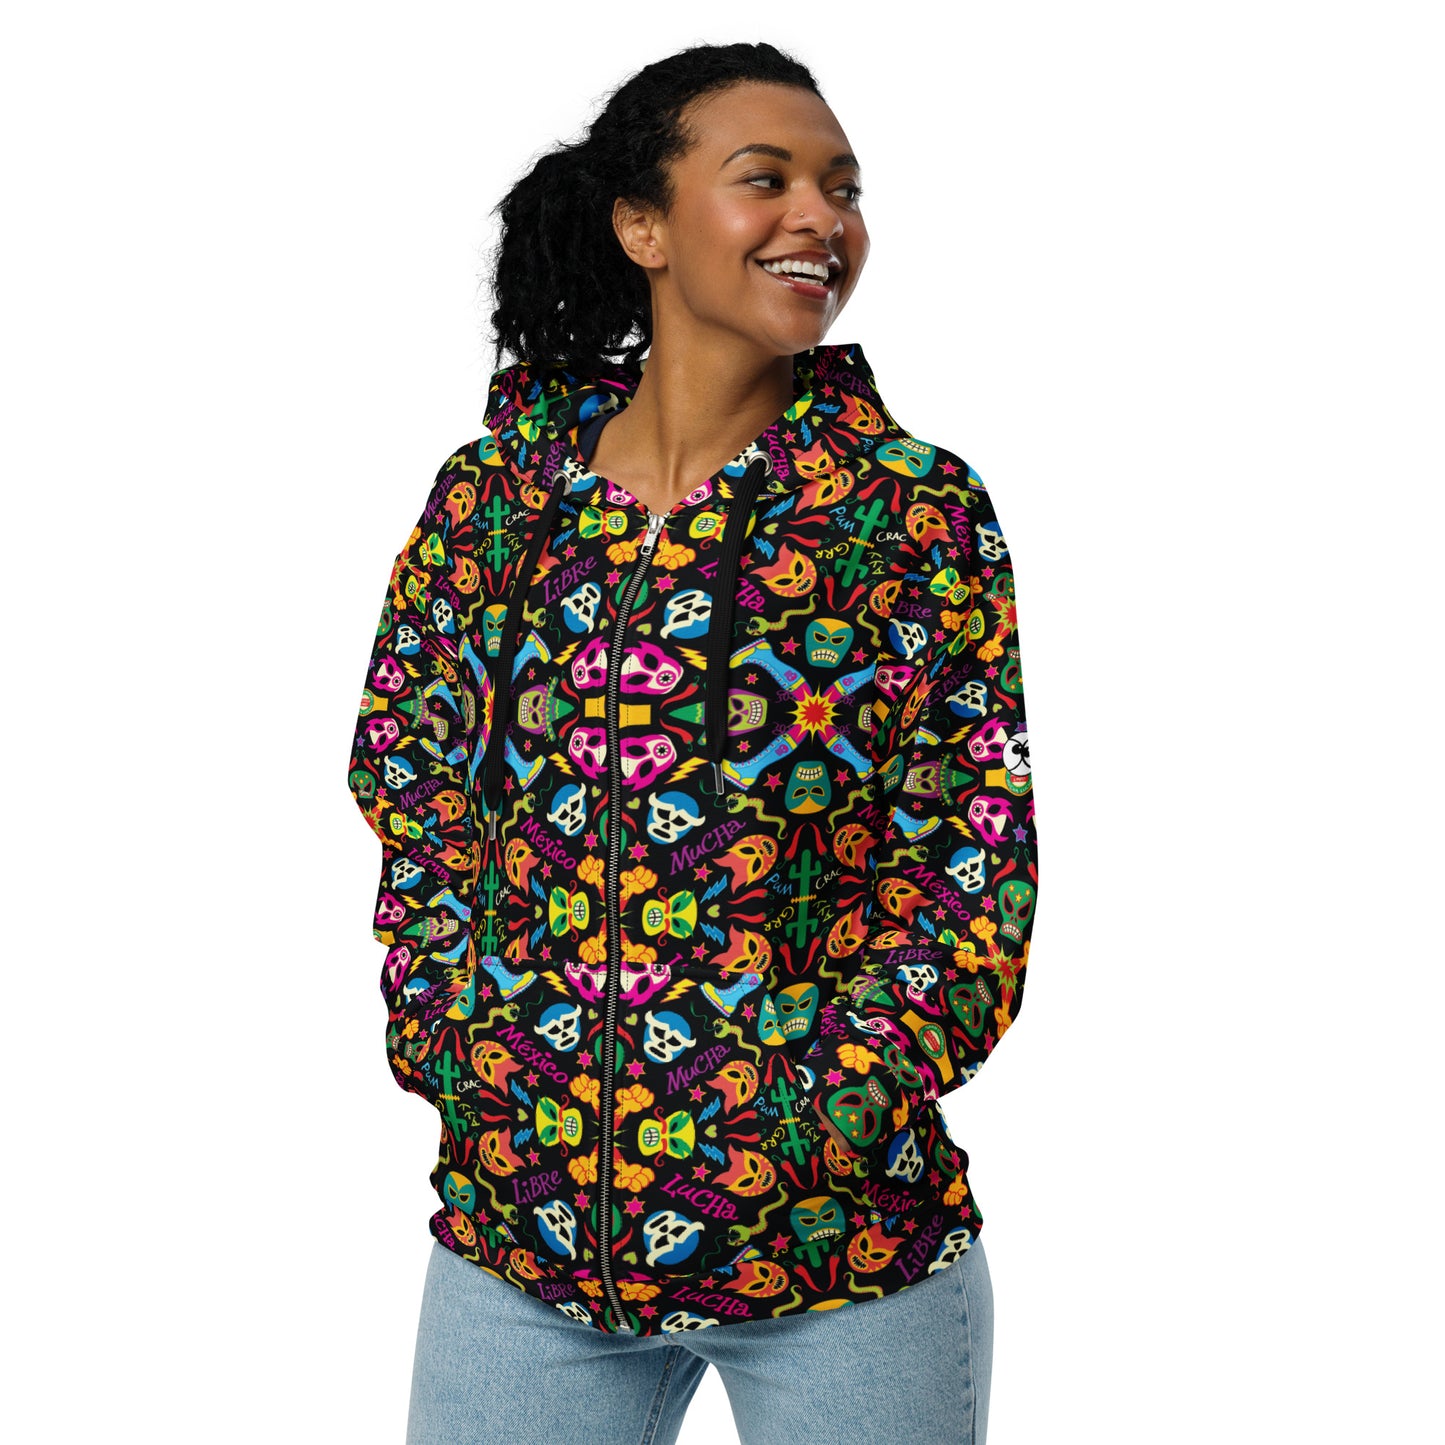 Mexican wrestling colorful party - Unisex zip hoodie. Overview